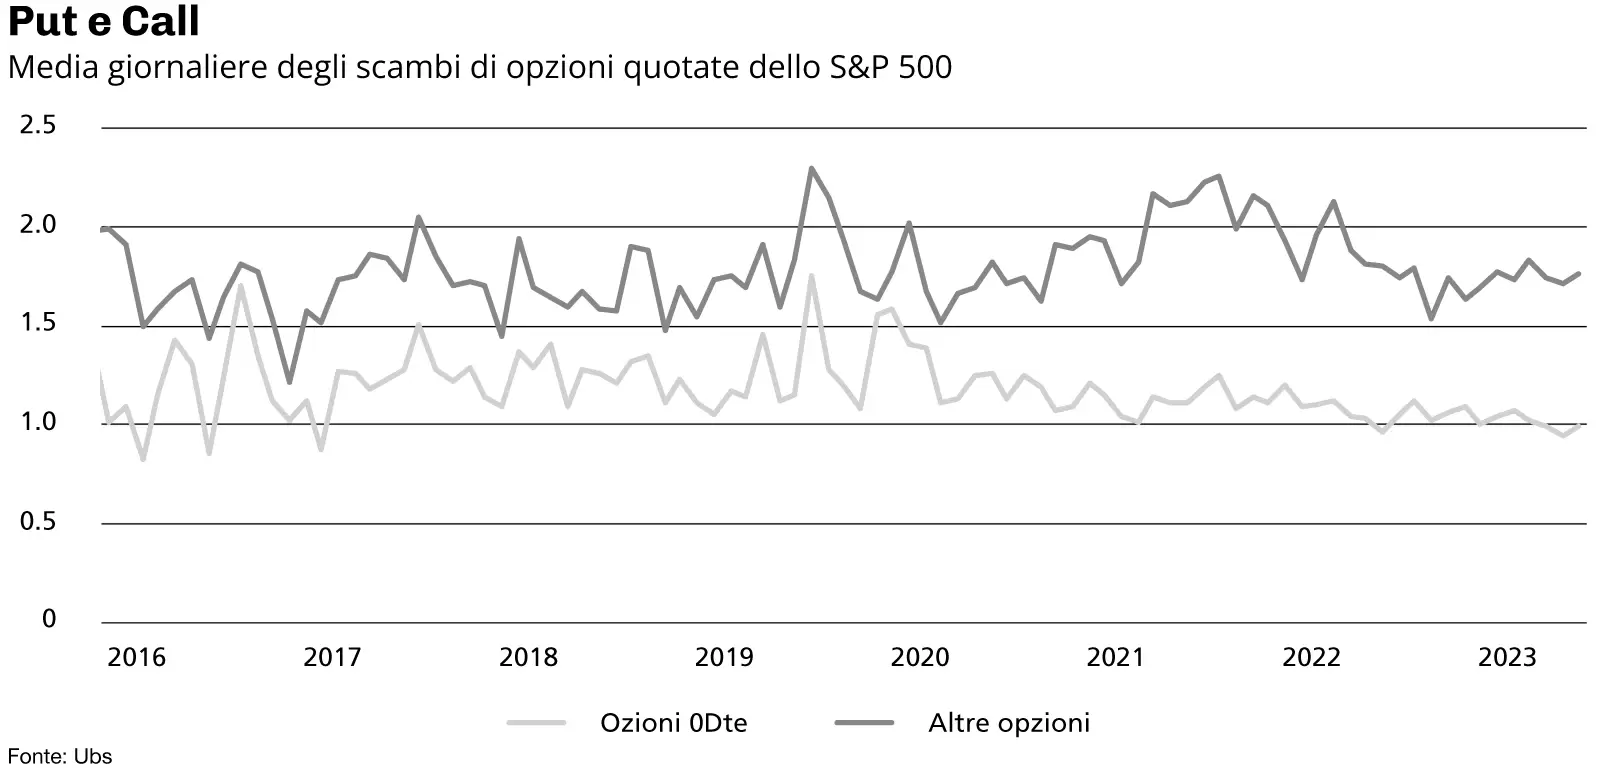 UBS media scambi-opzioni quotate S&P 500